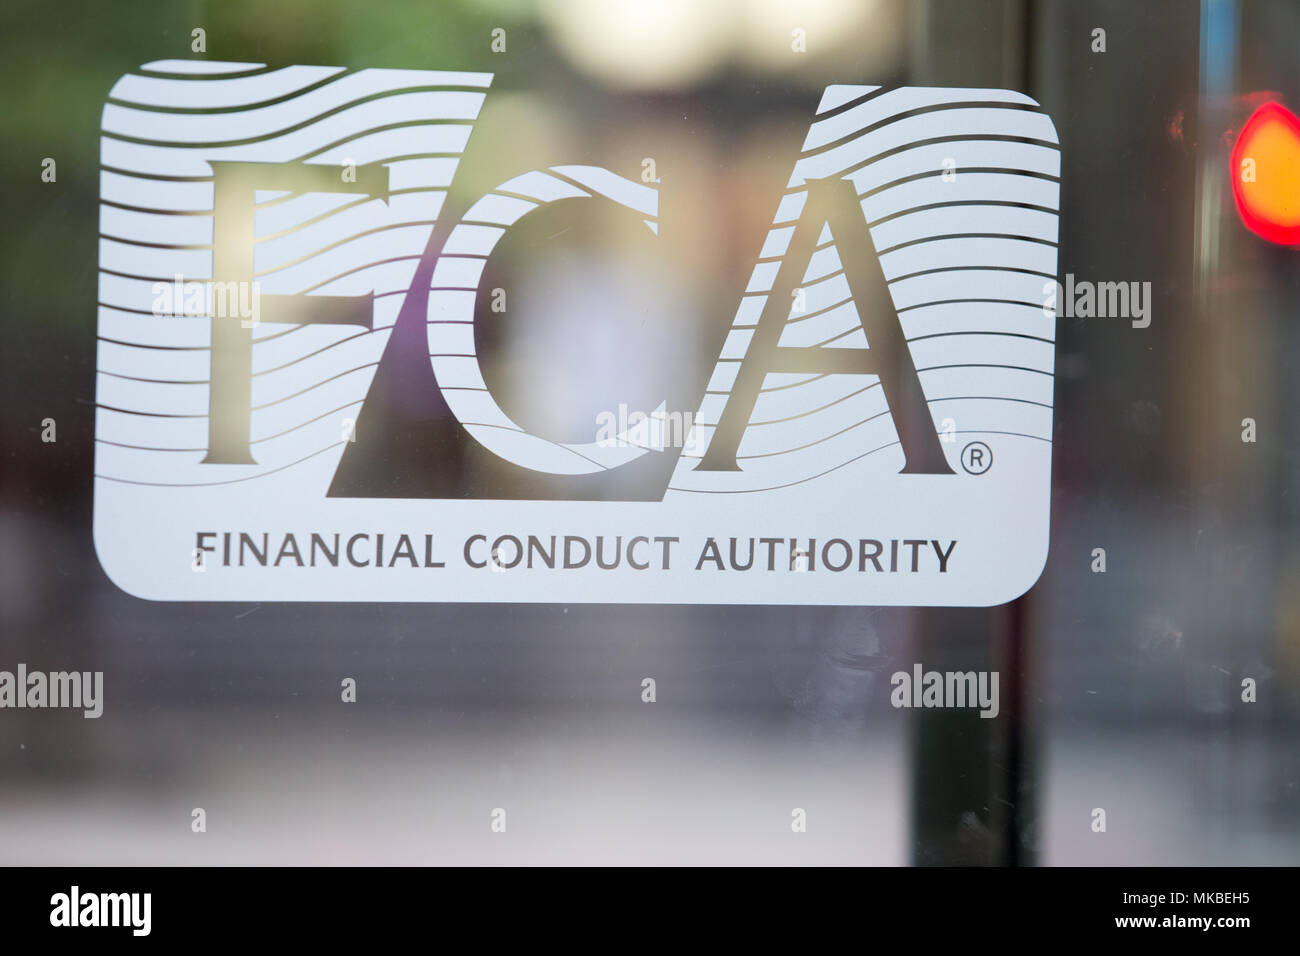 Financial Conduct Authority (FCA) offices, North Colonnade, Docklands, London. Picture shows corporate logo on the glass entrance Stock Photo